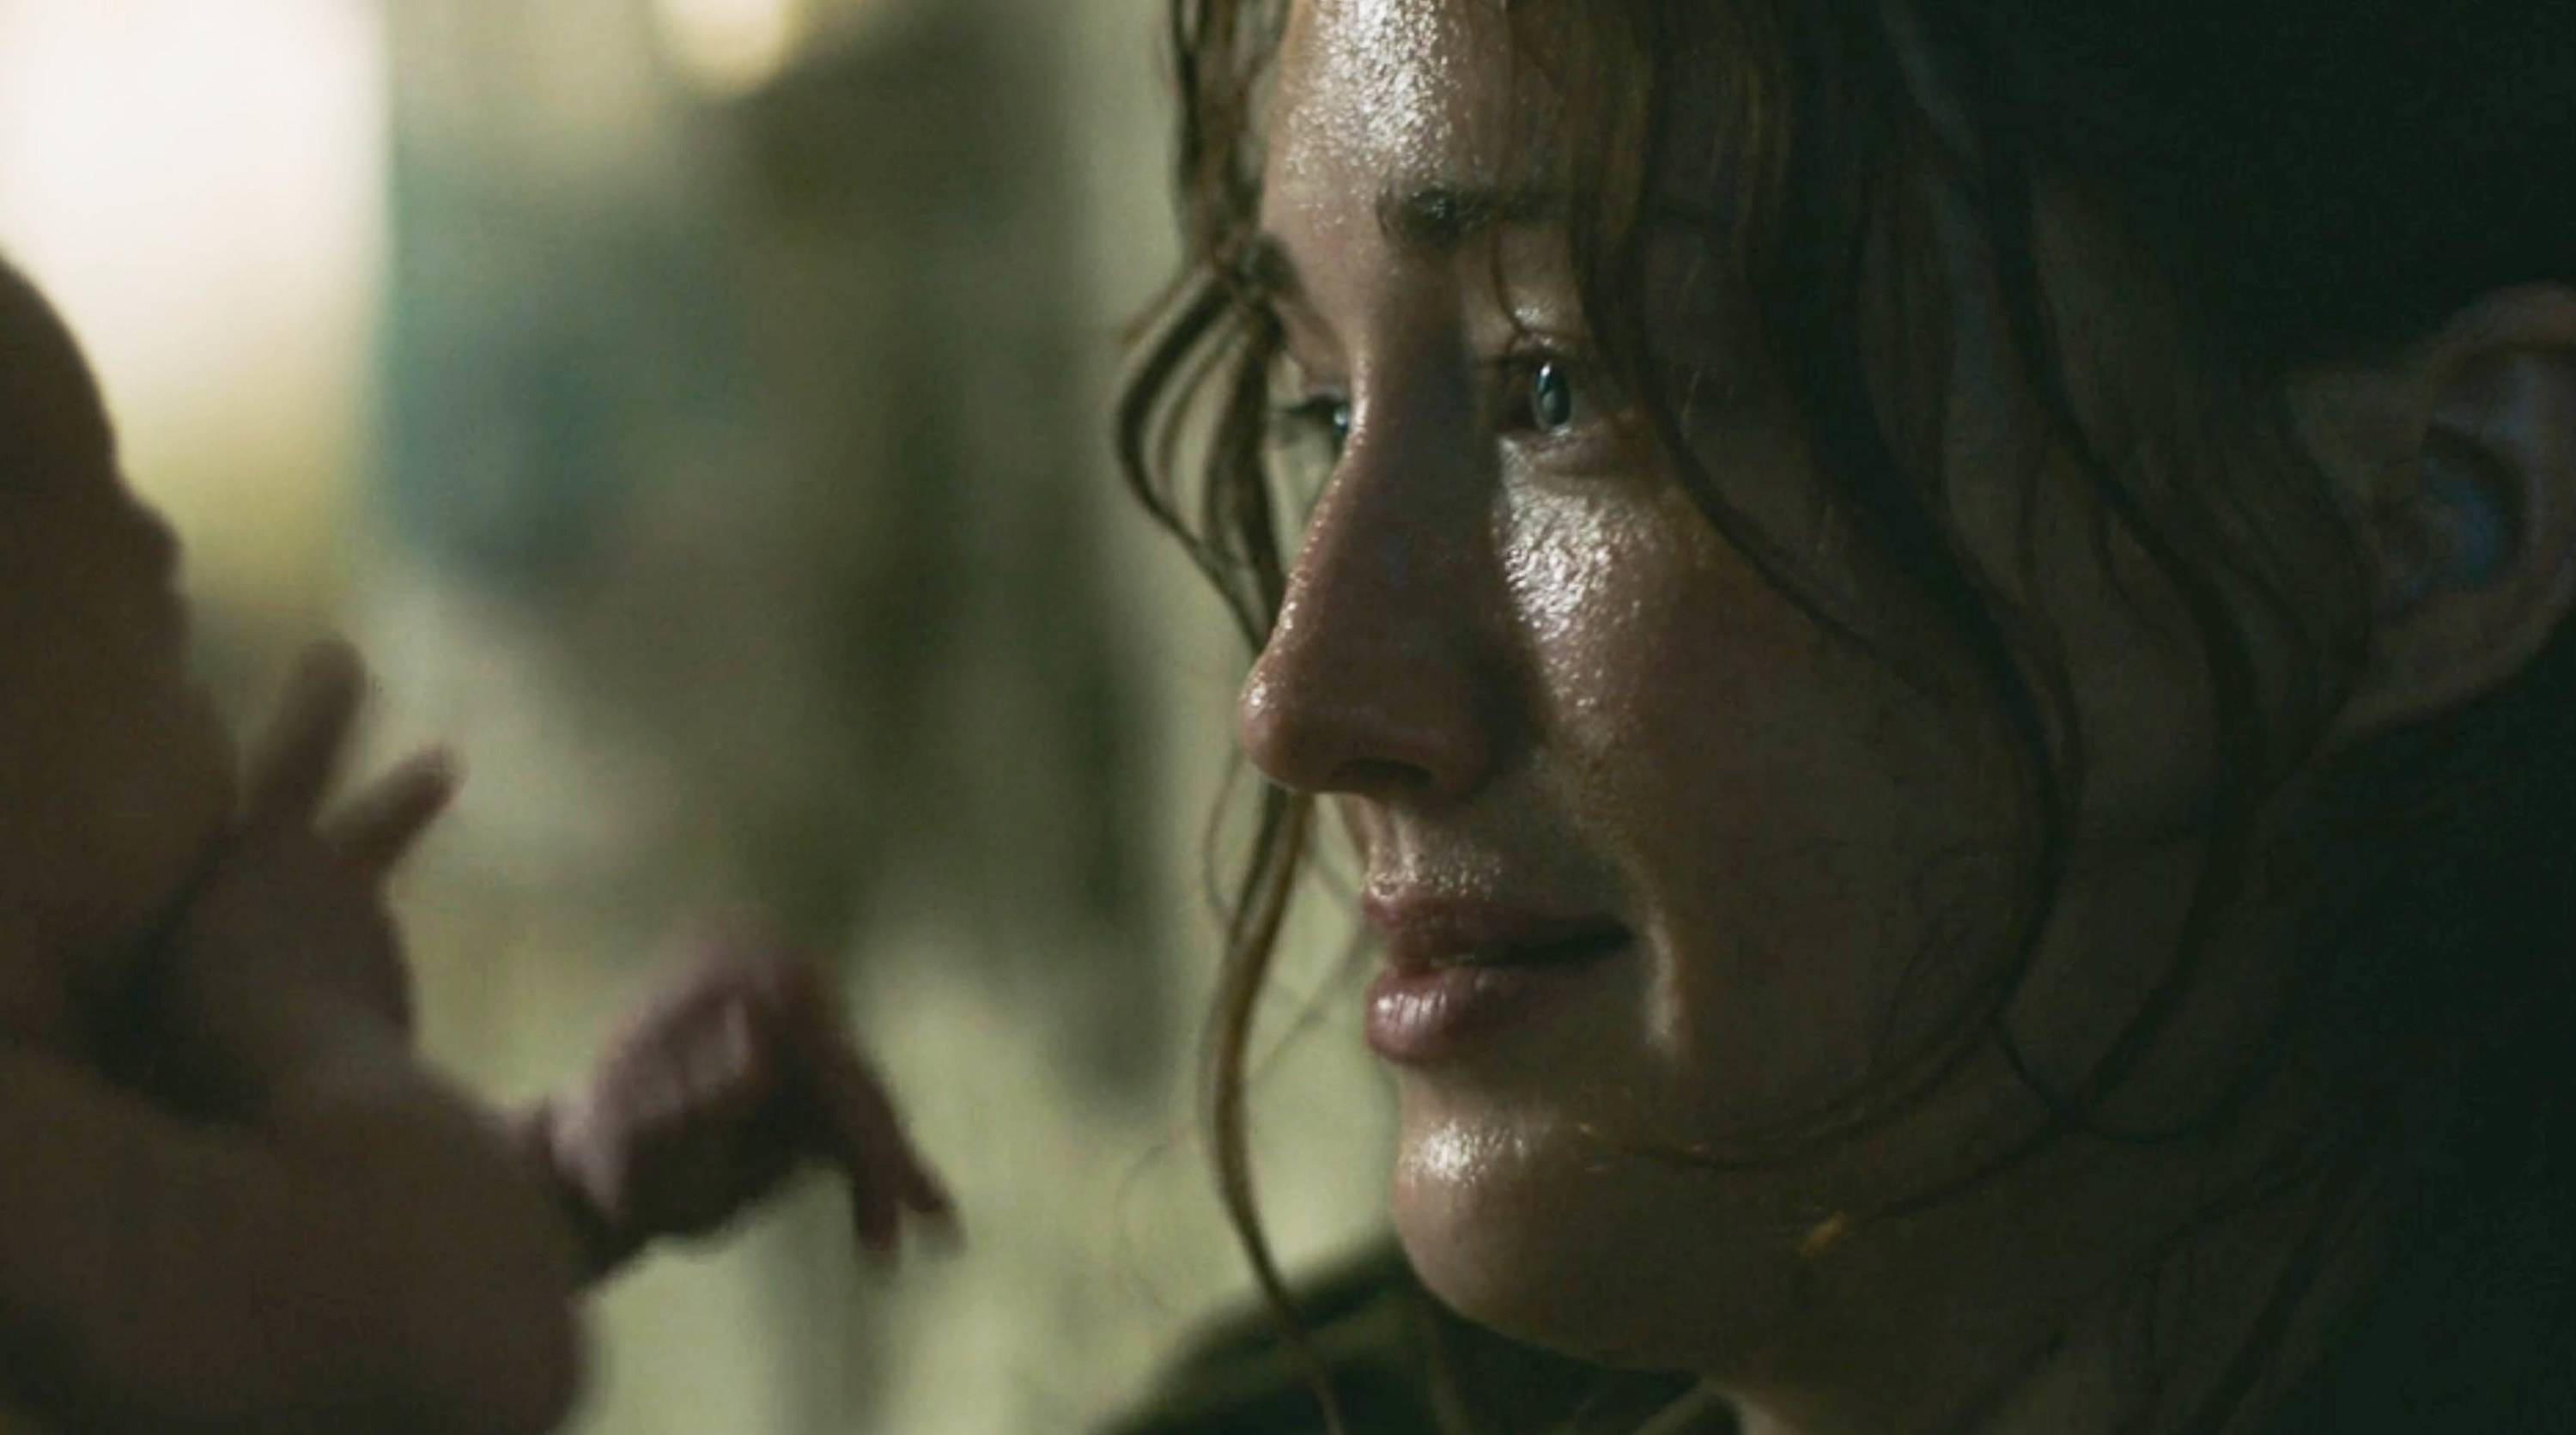 We Ain't Ready” - The Original Ellie a.k.a Ashley Johnson and Bella Ramsey's  Heart-Breaking 'Mother-Daughter' Relationship Will Leave the Last of Us  Fans in Tears - EssentiallySports